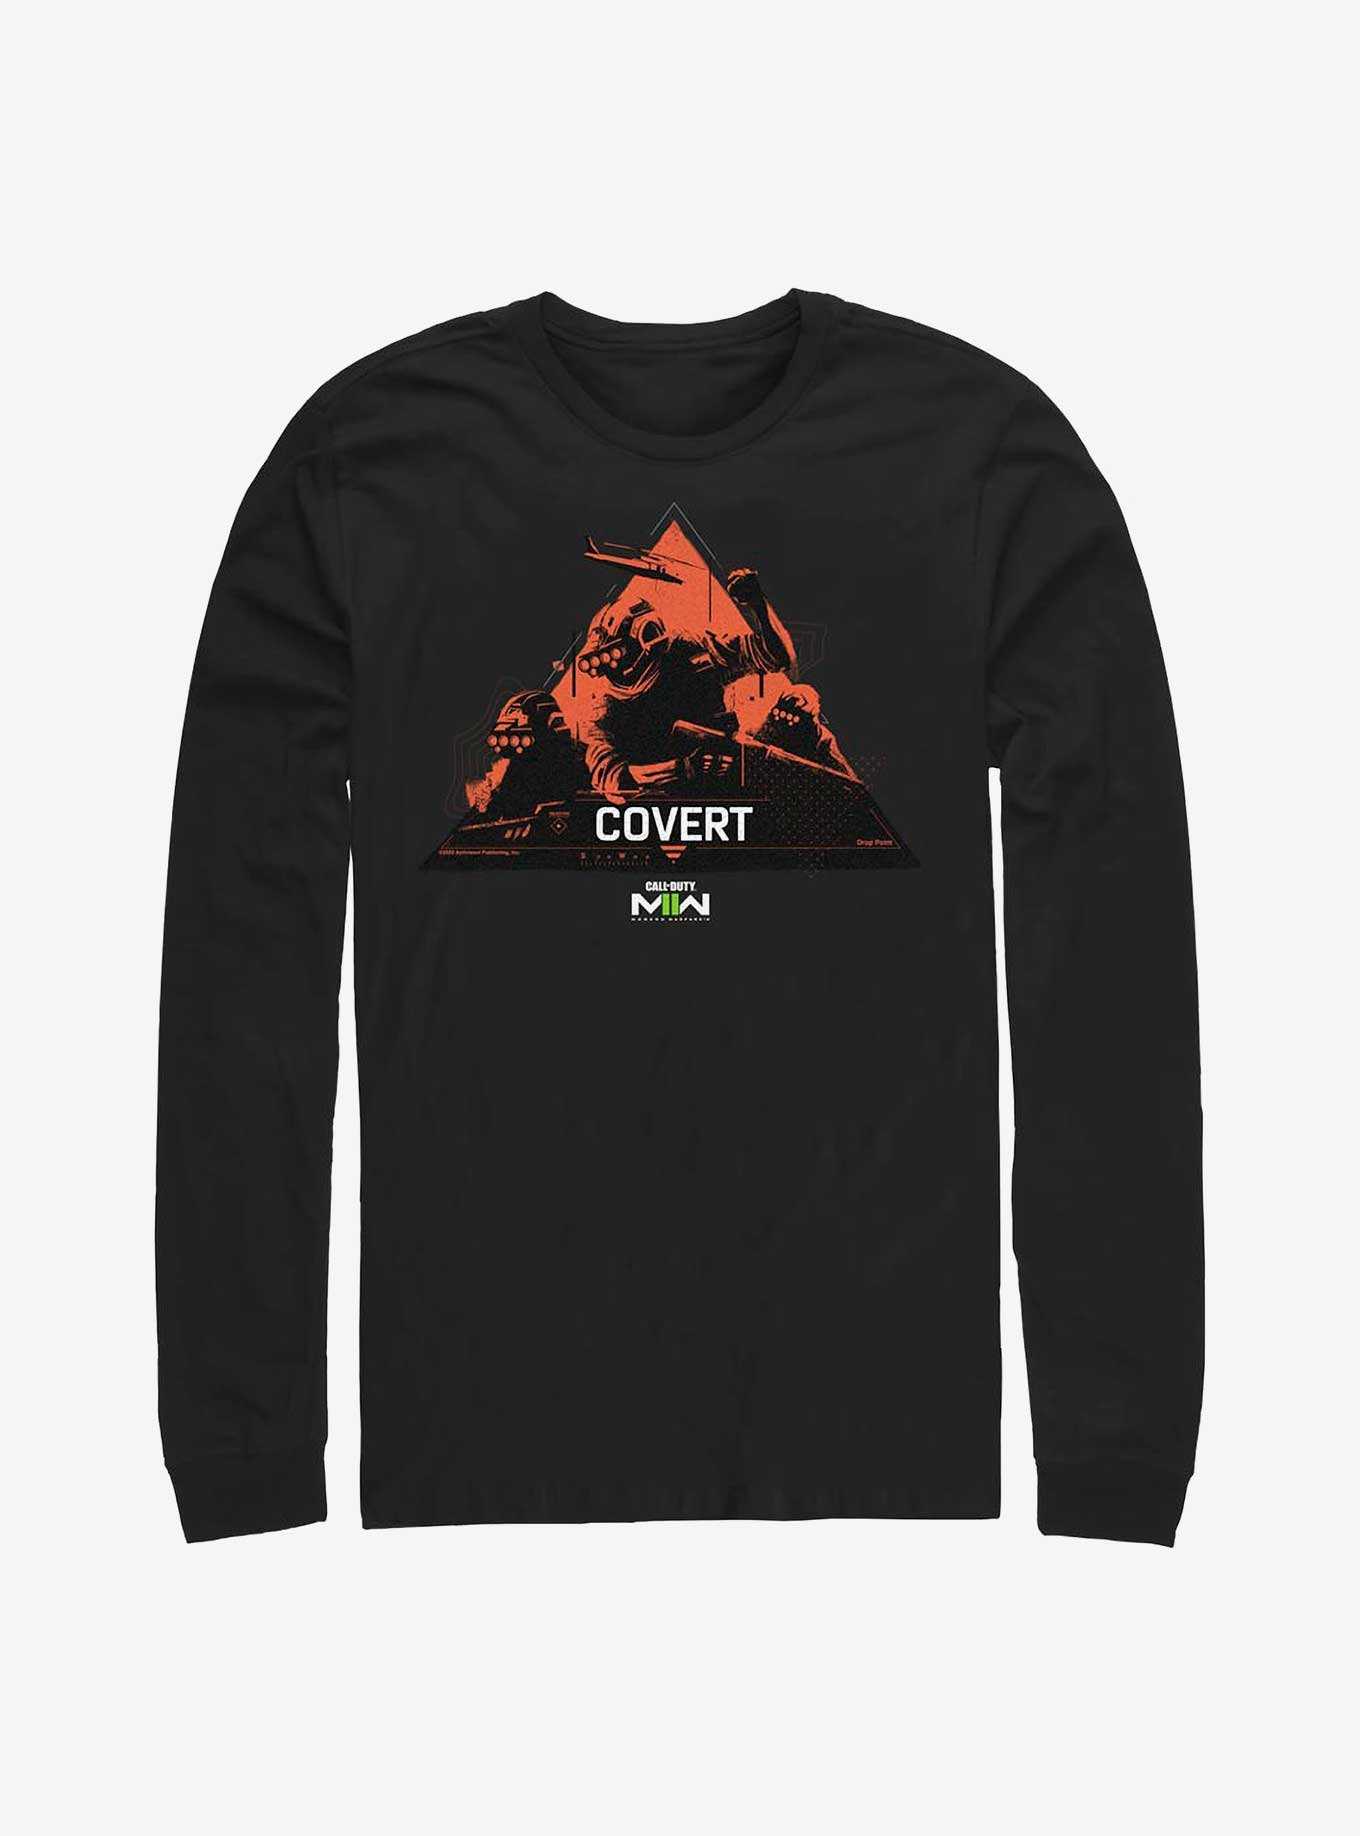 Call Of Duty Covert Red Variant Long Sleeve T-Shirt, , hi-res